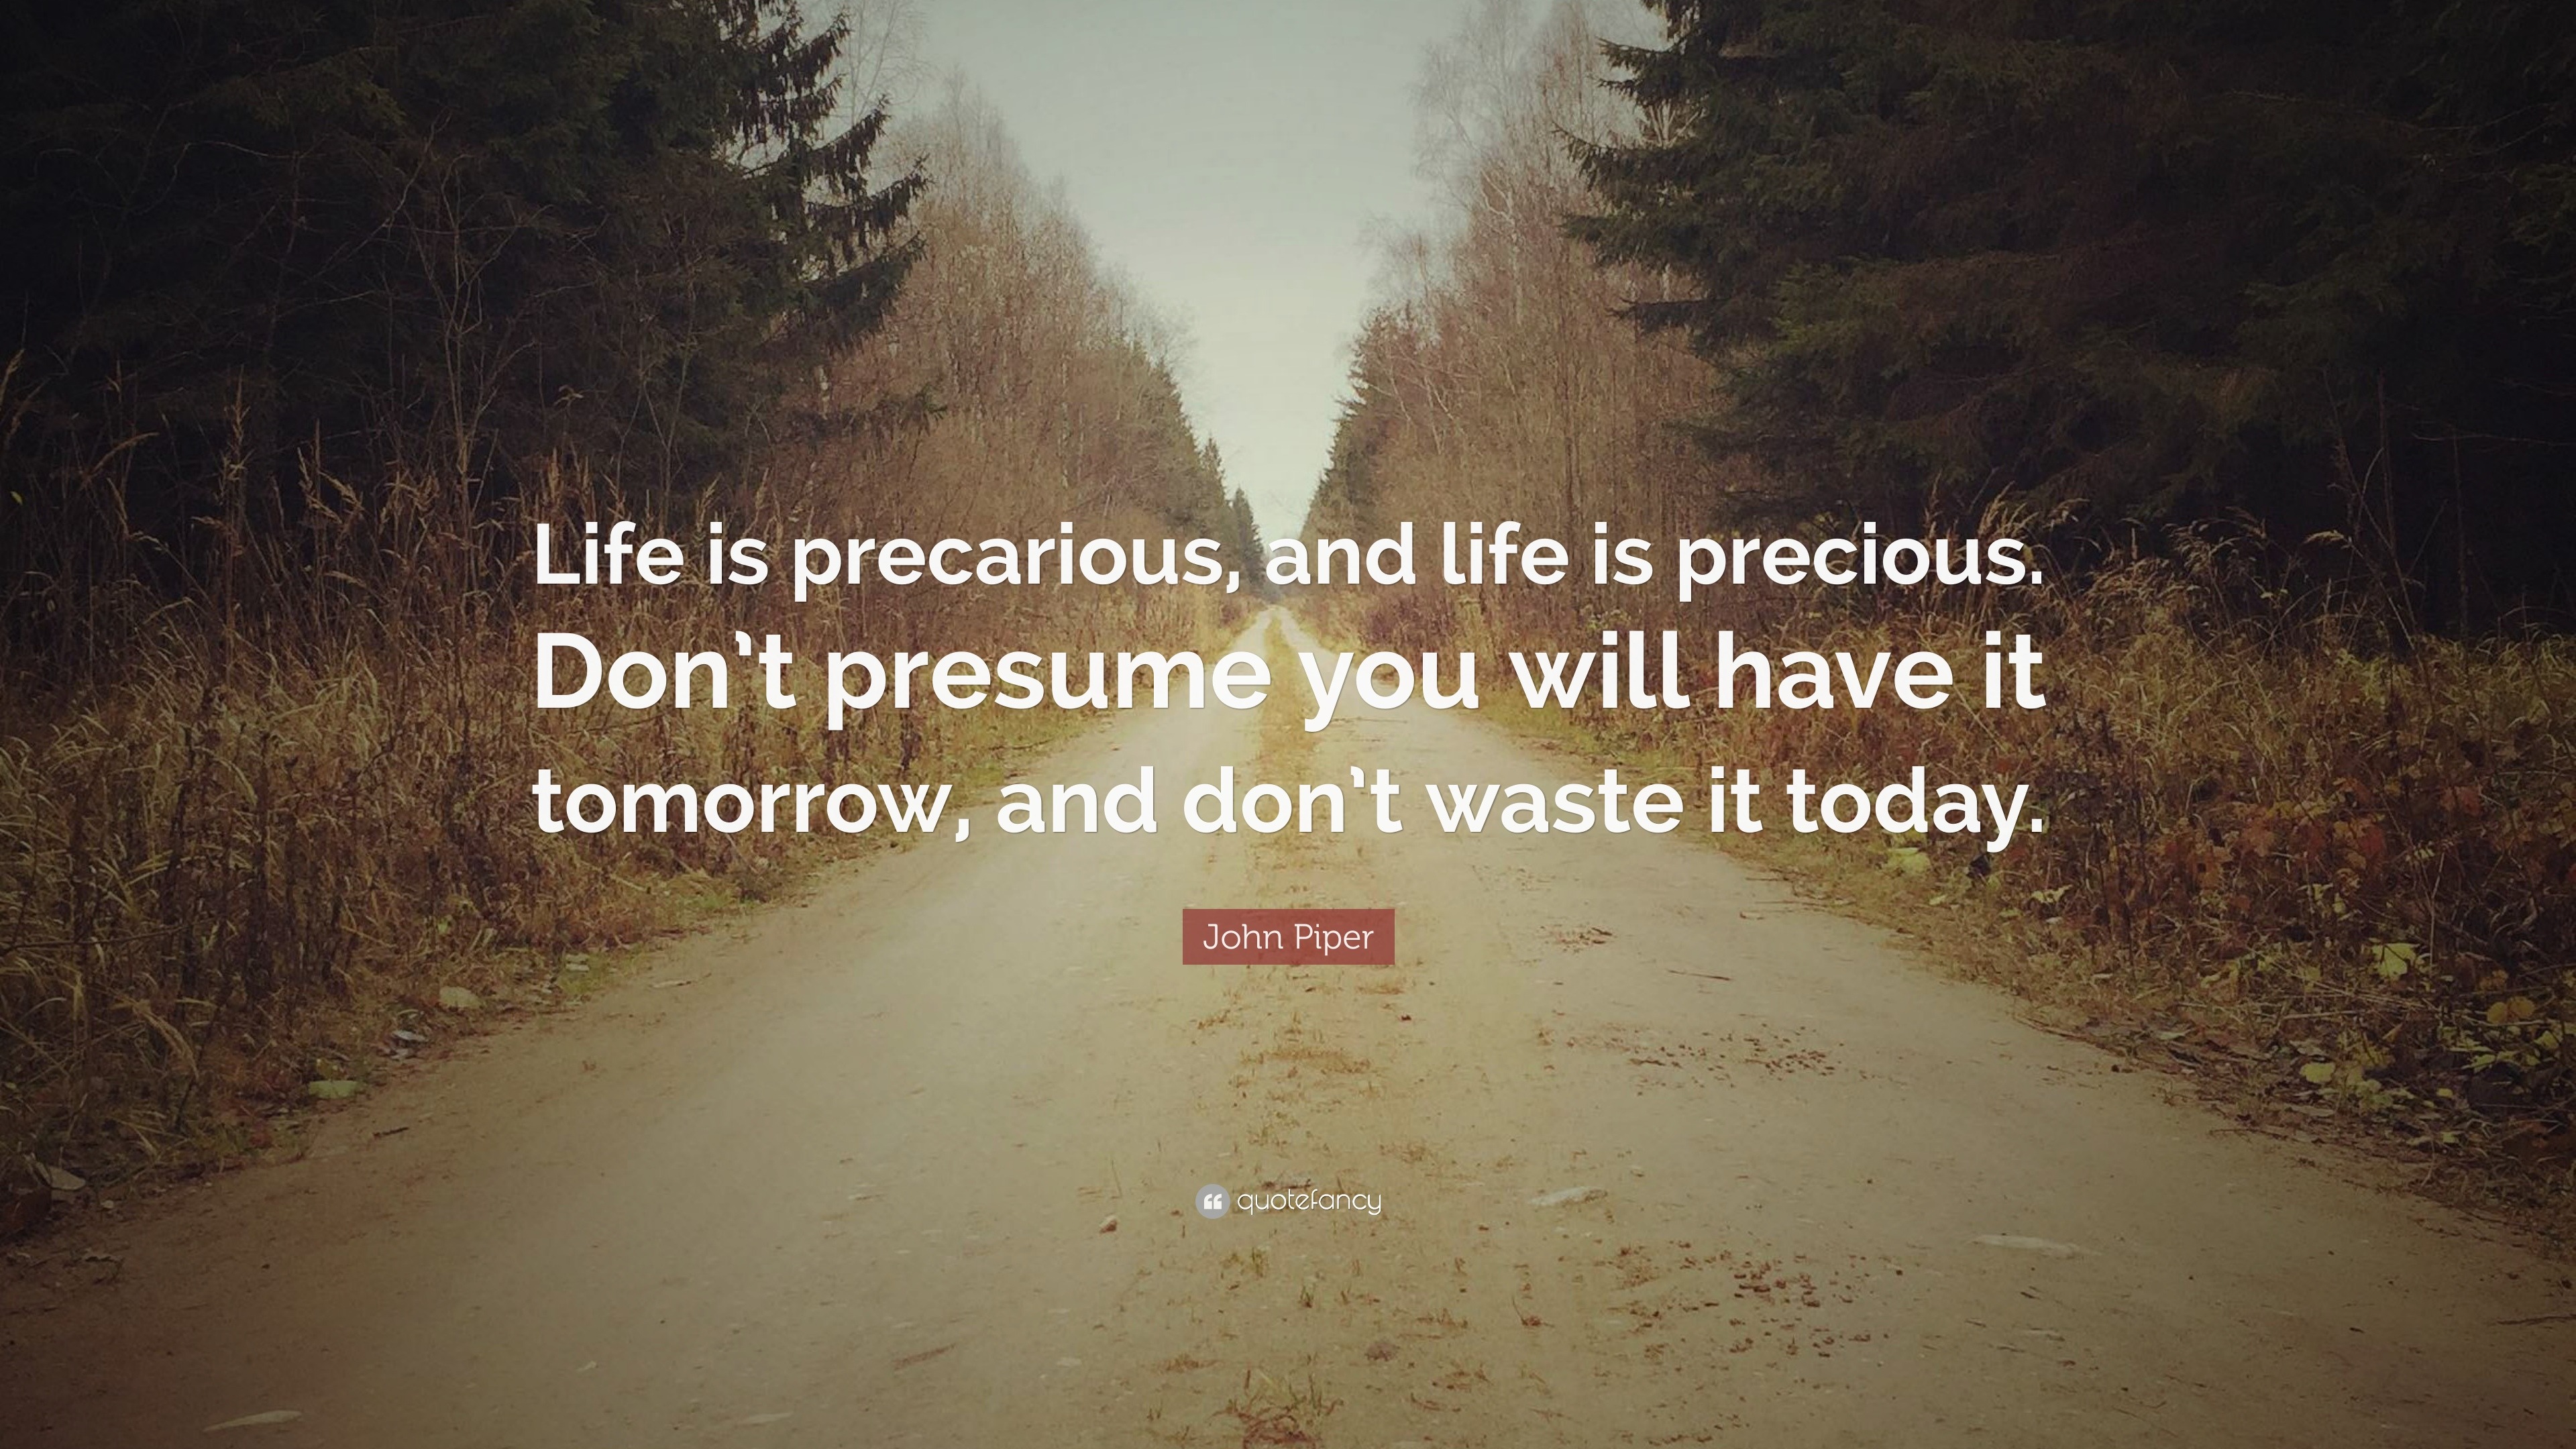 John Piper Quote “Life is precarious and life is precious Don